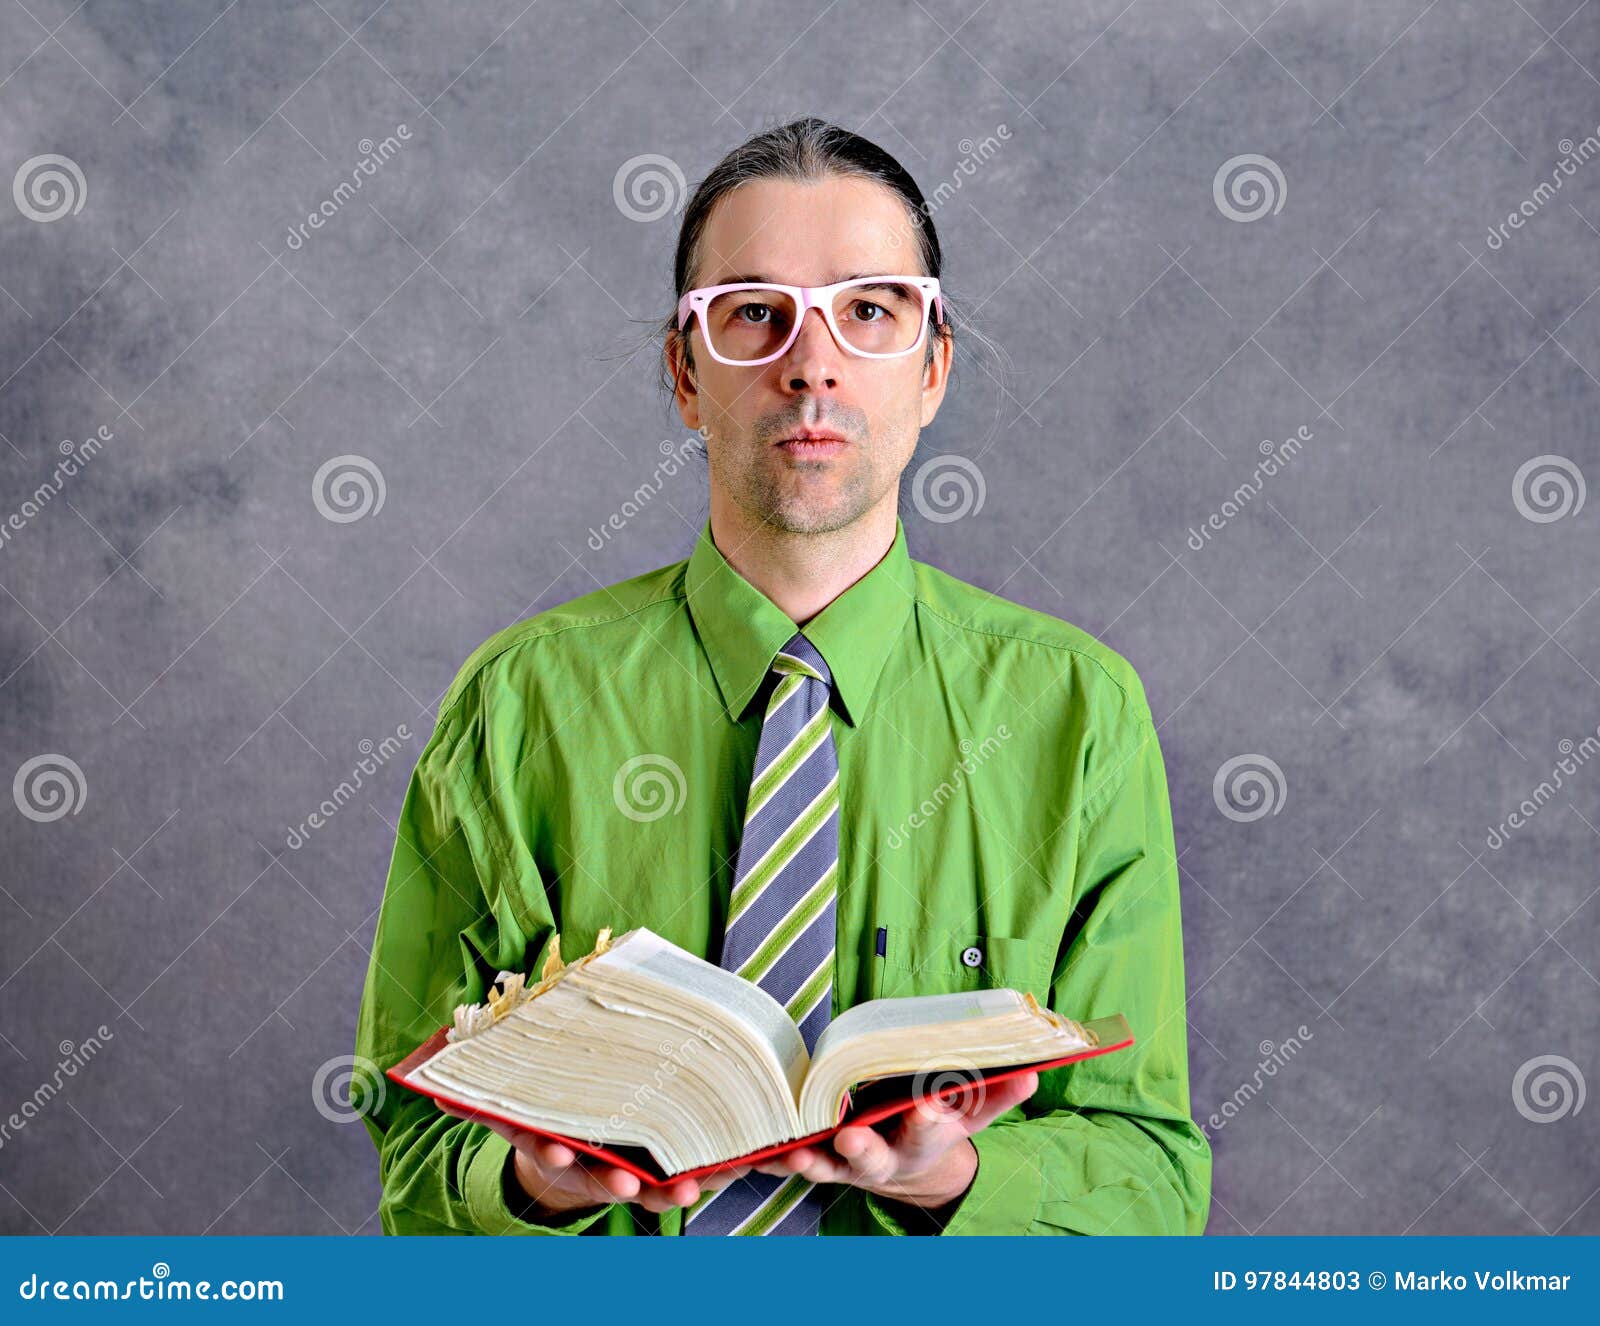 funny man with statute book and pink glasses